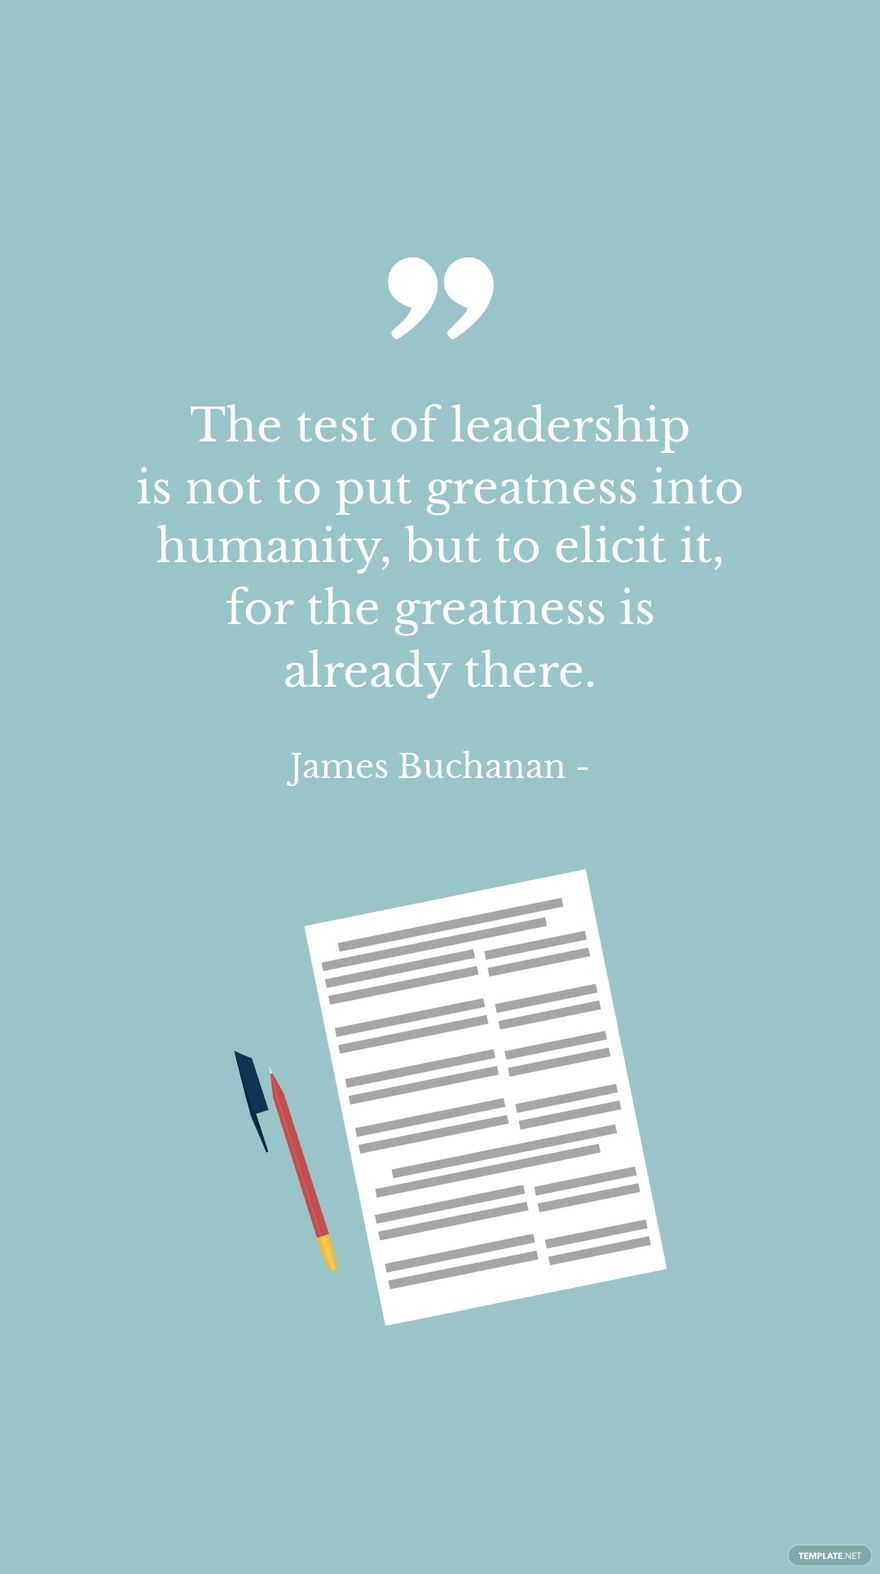 James Buchanan - The test of leadership is not to put greatness into humanity, but to elicit it, for the greatness is already there. in JPG